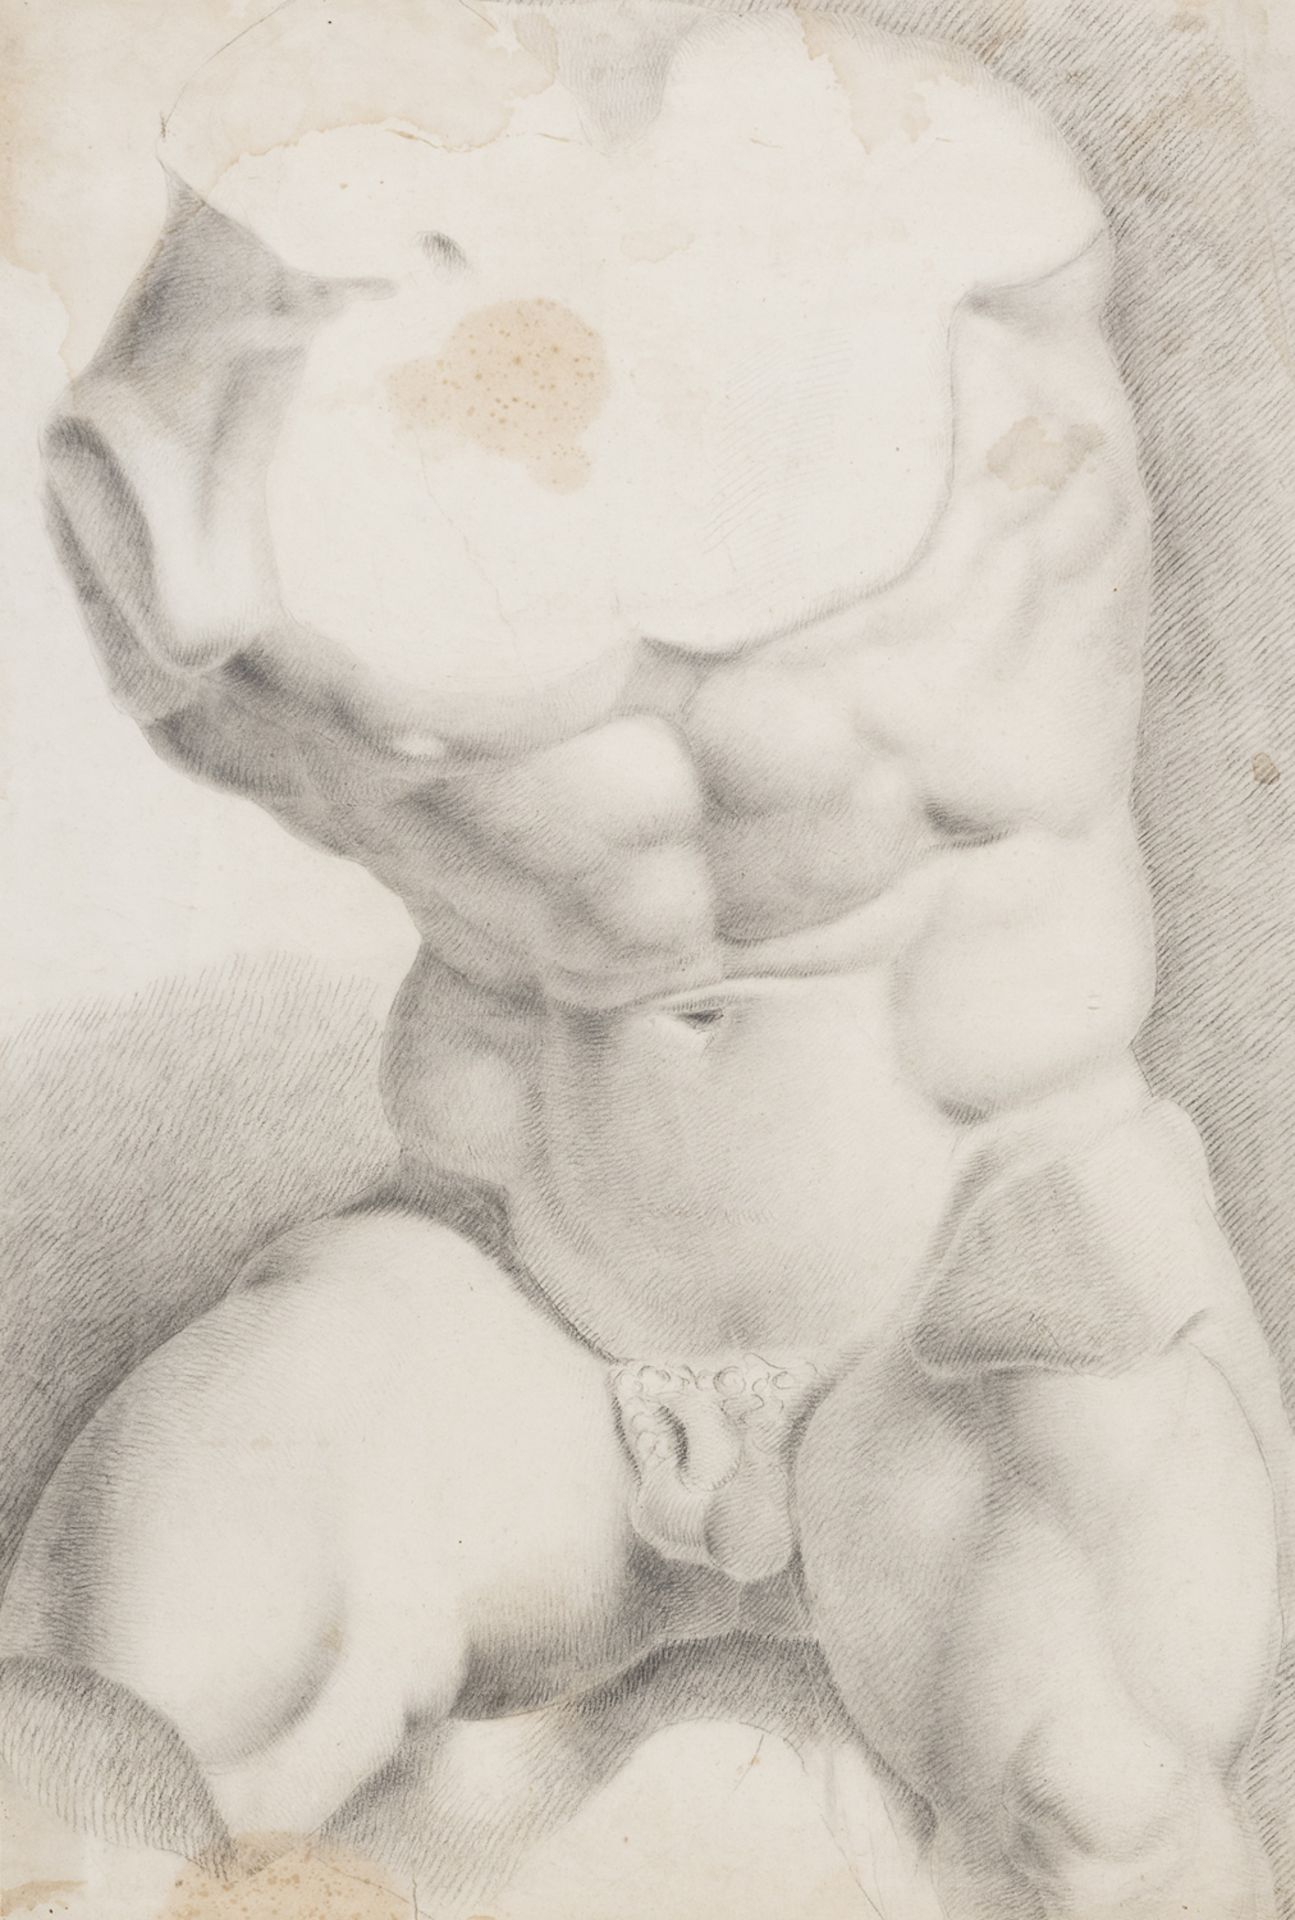 PENCIL DRAWING EARLY 20TH CENTURY